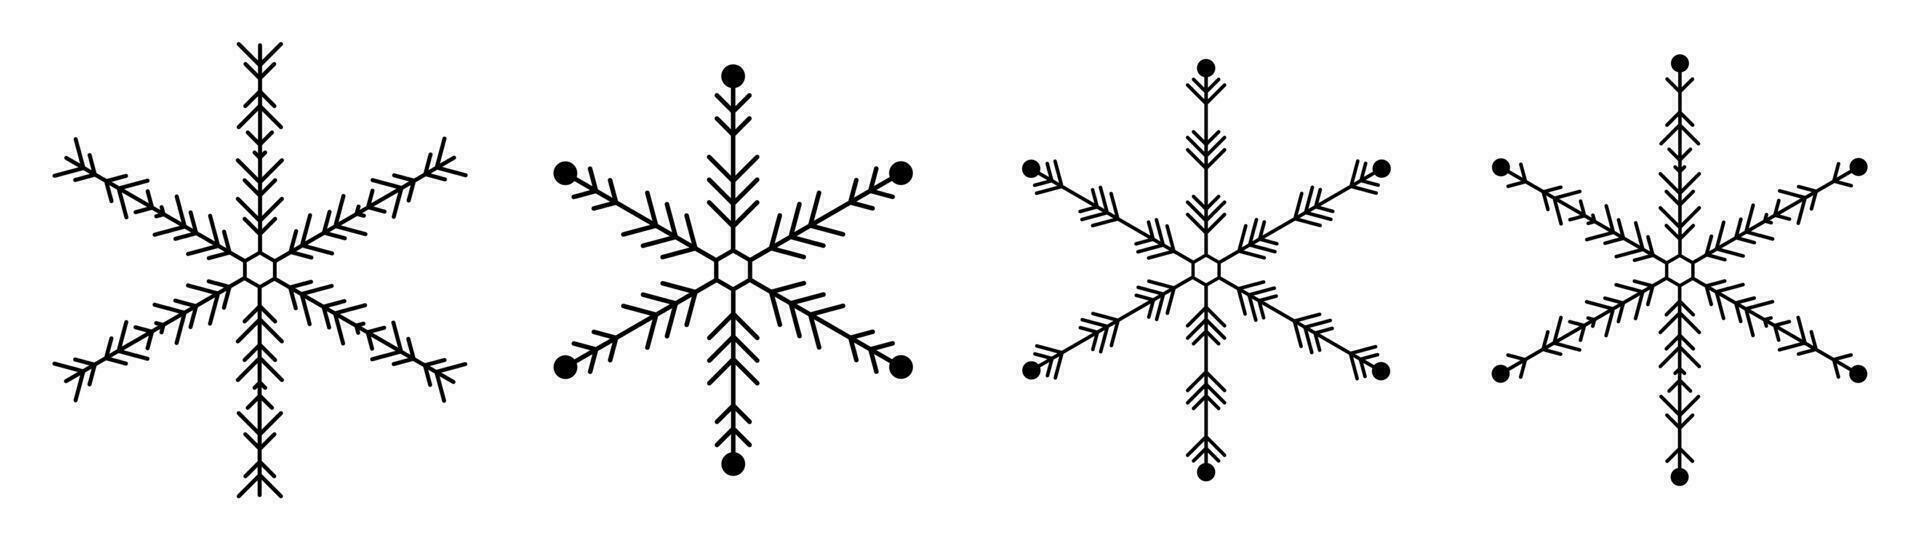 Snowflake collection on white background. Black Snow flakes set silhouette for holidays banner, cards, decor vector